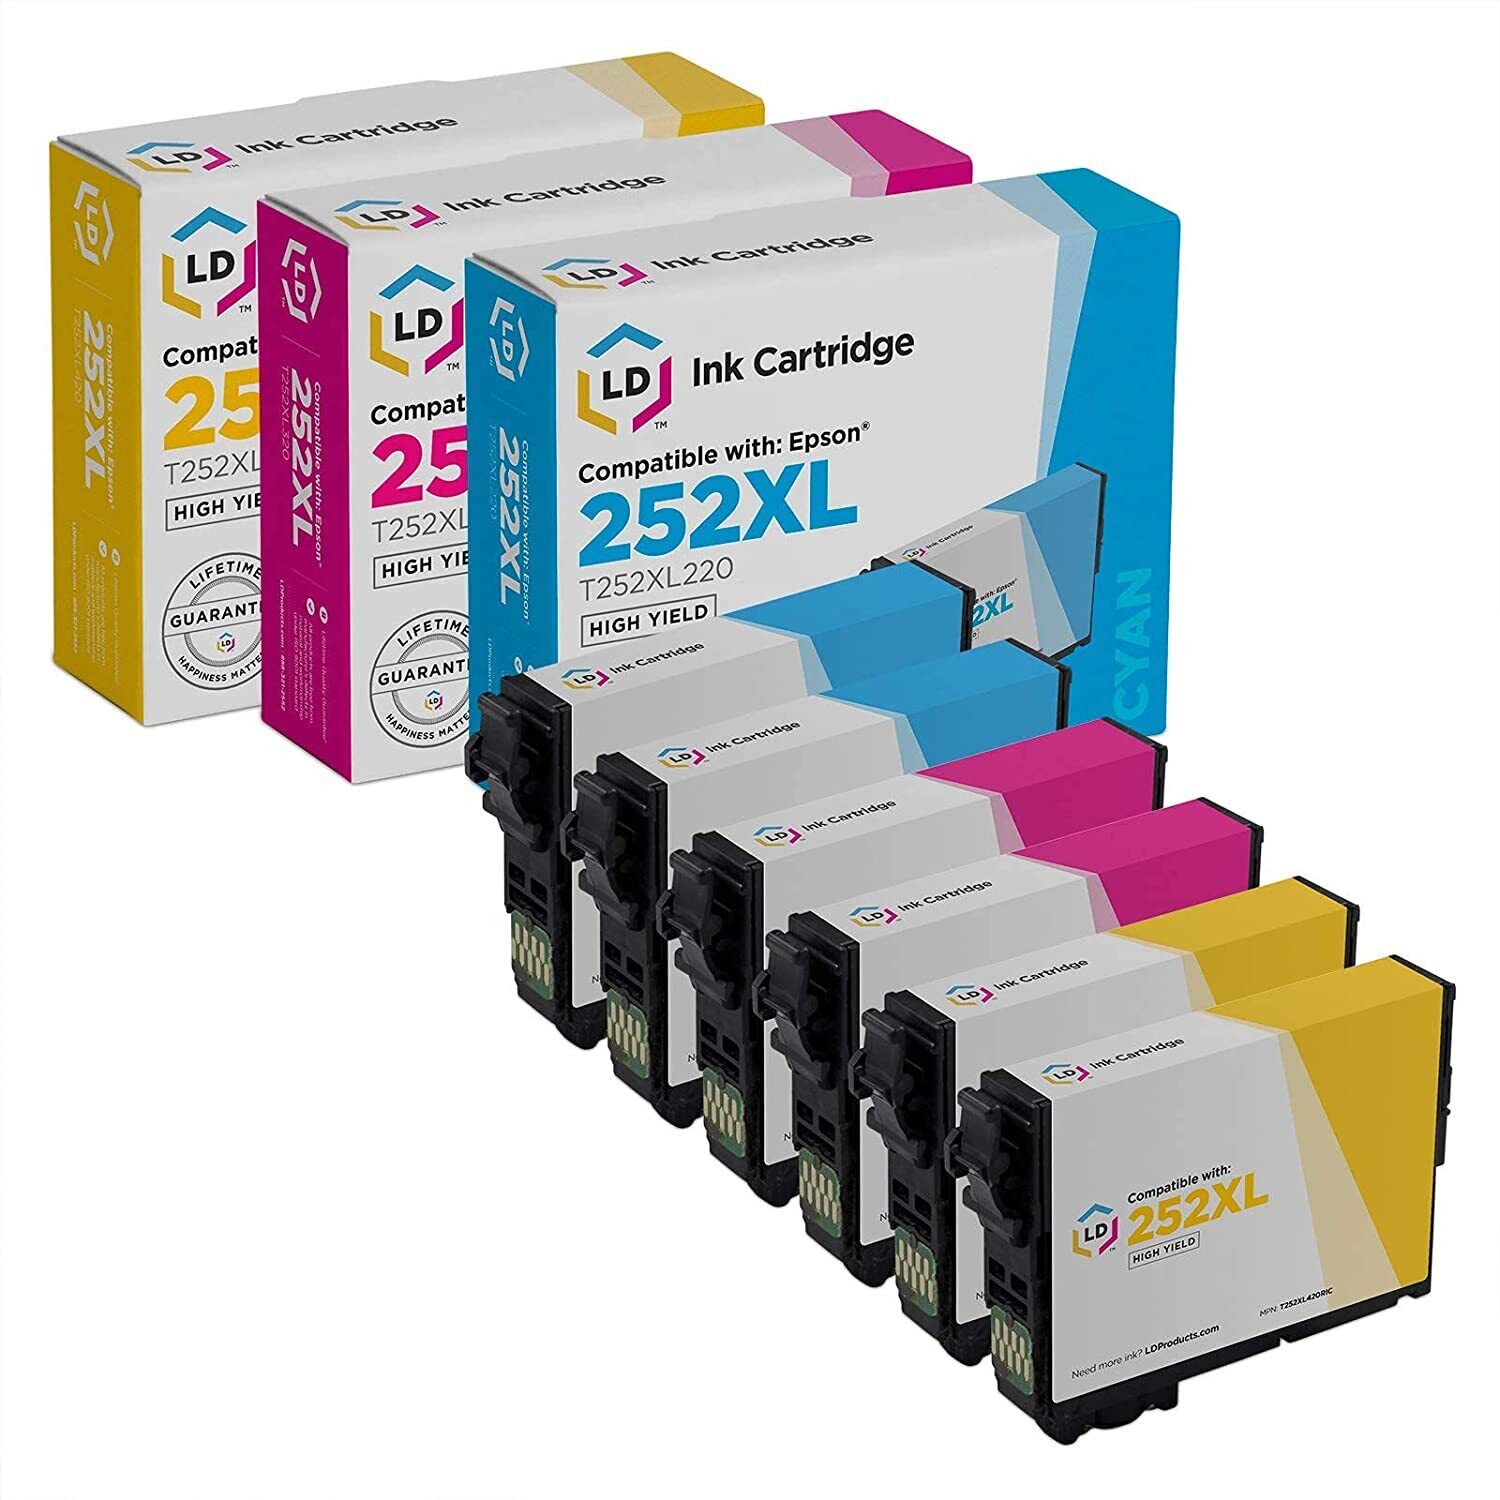 LD Products Epson 252XL High Yield Ink Cartridge Replacements 6pk Bundle